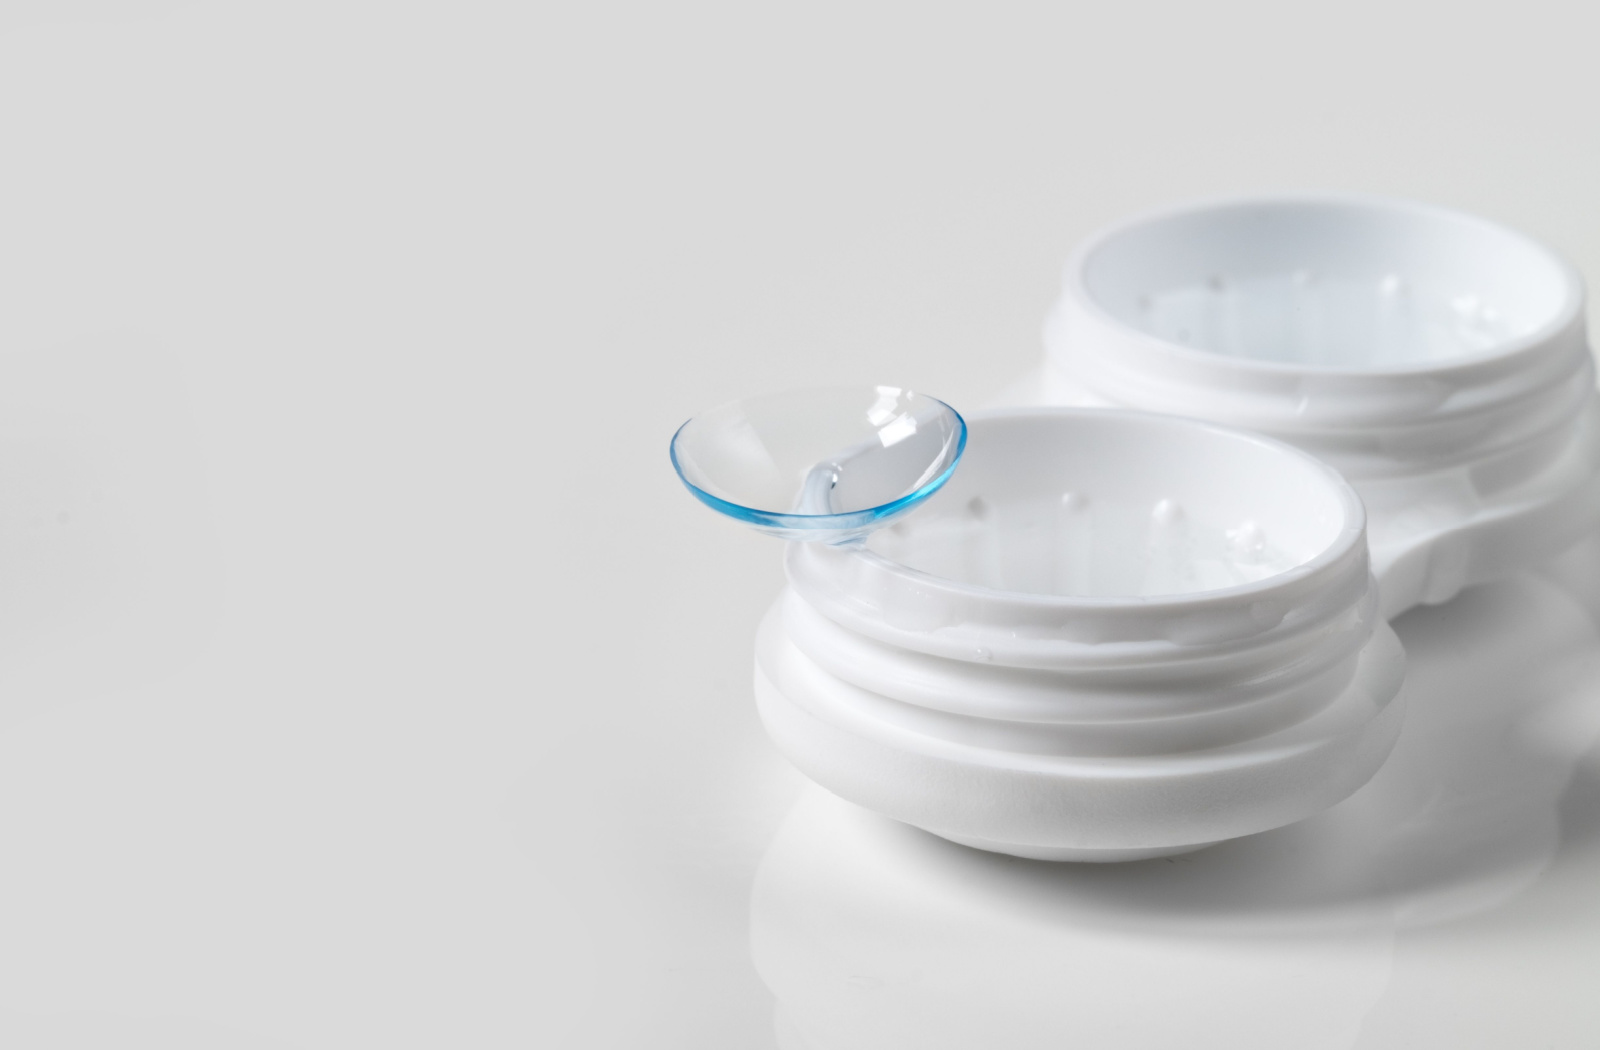 A pair of contact lenses sitting on a contact lens case.